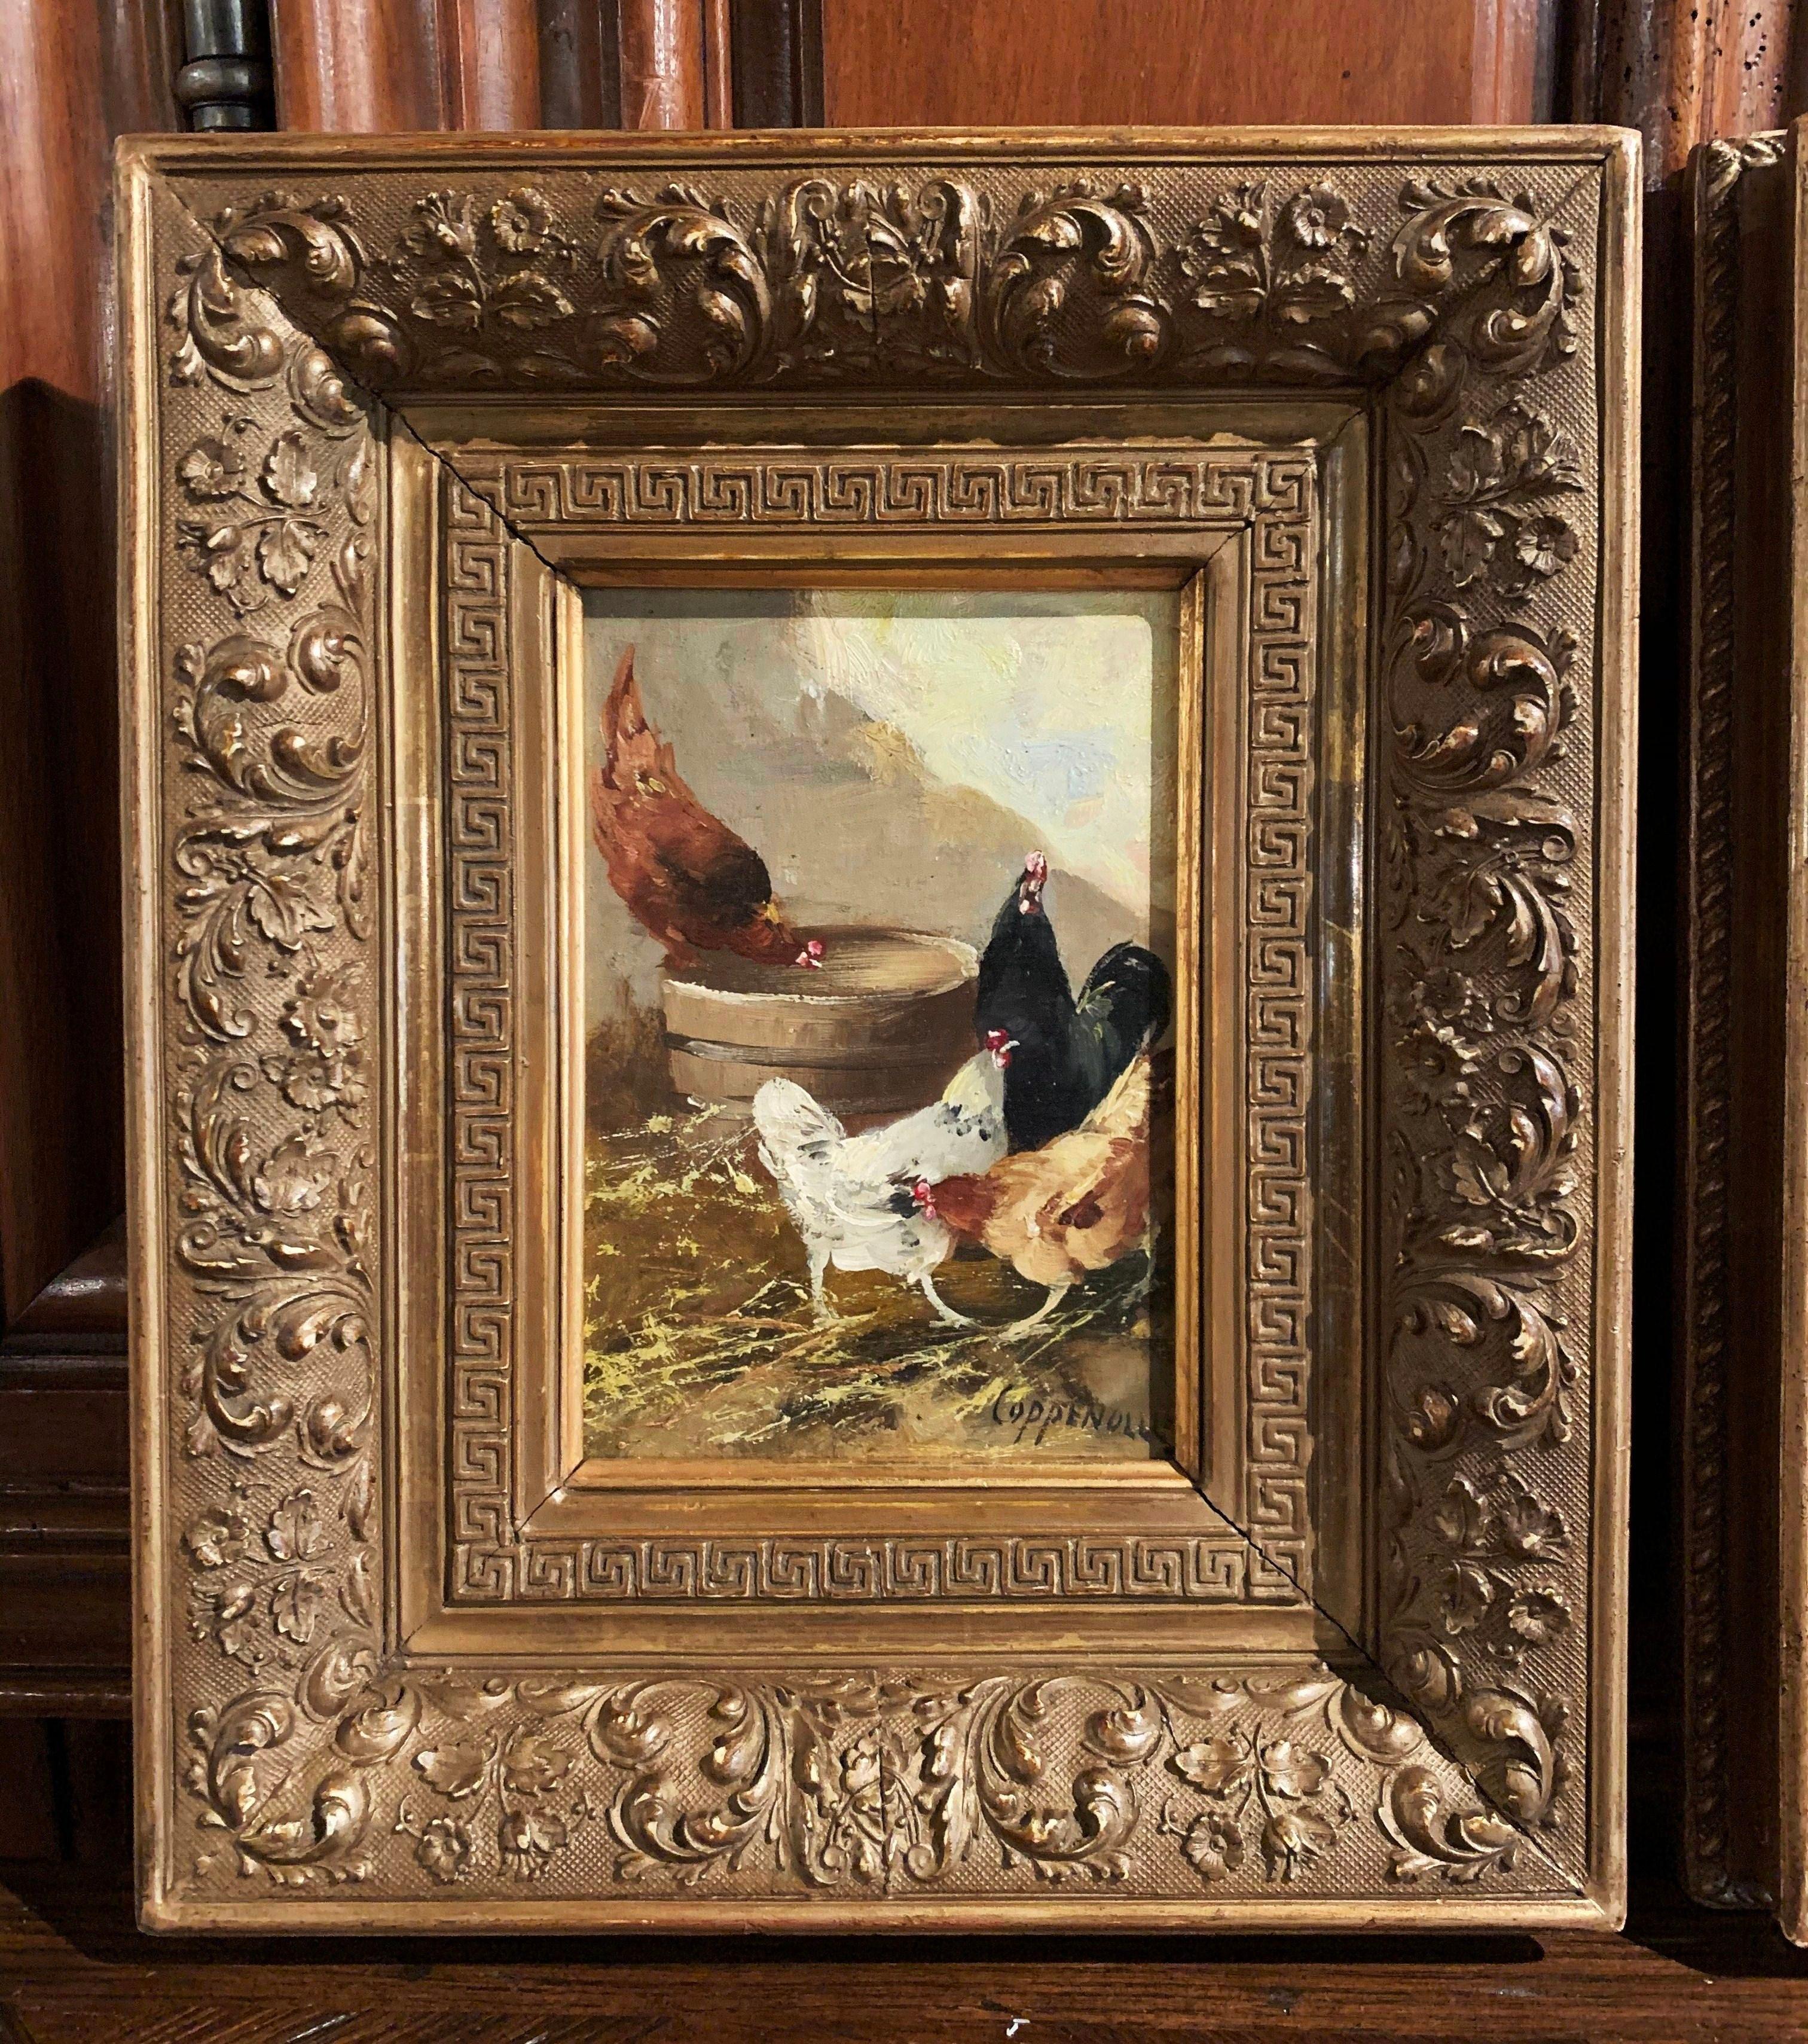 These beautiful antique chicken paintings were created in Belgium, circa 1880, painted on board and set inside the original carved gilt frame, each art work depicts a 